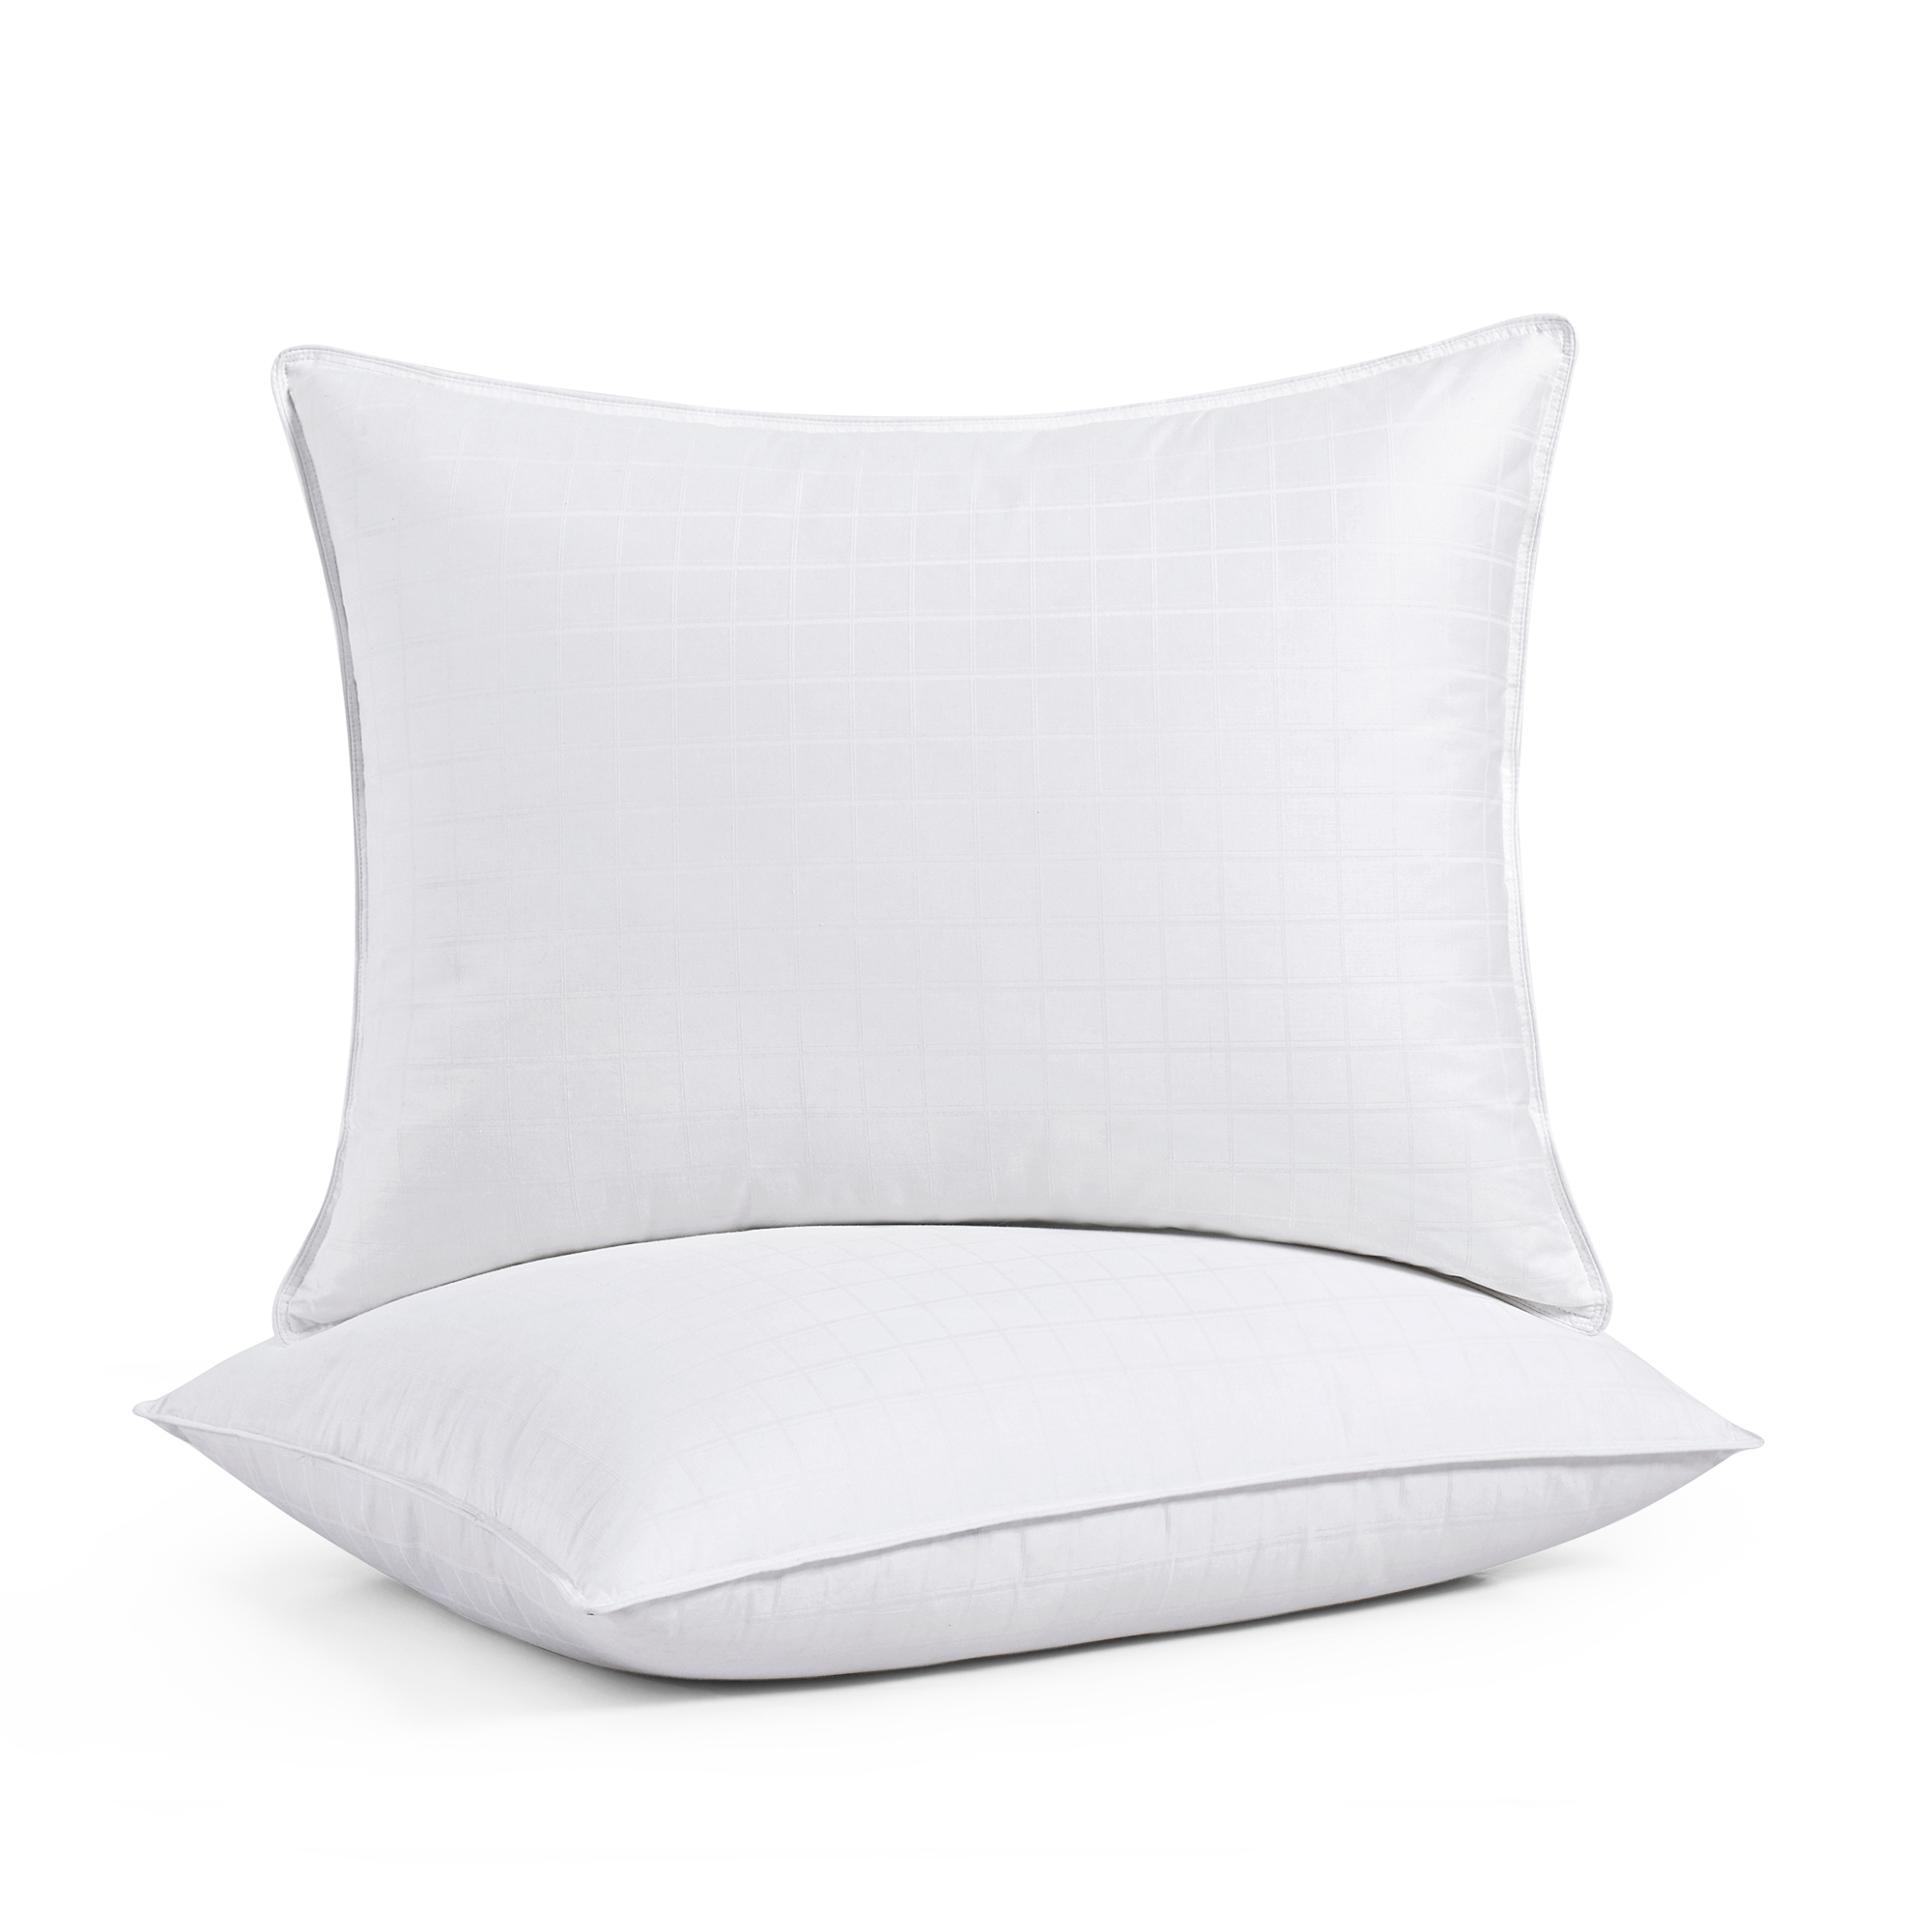 Hotel Luxury Premium White Goose Down Pillow For Sleeping, Pillow-in-a- Pillow Design, Cotton Fabric, Side And Back Sleepers, Set Of 2 - Sta